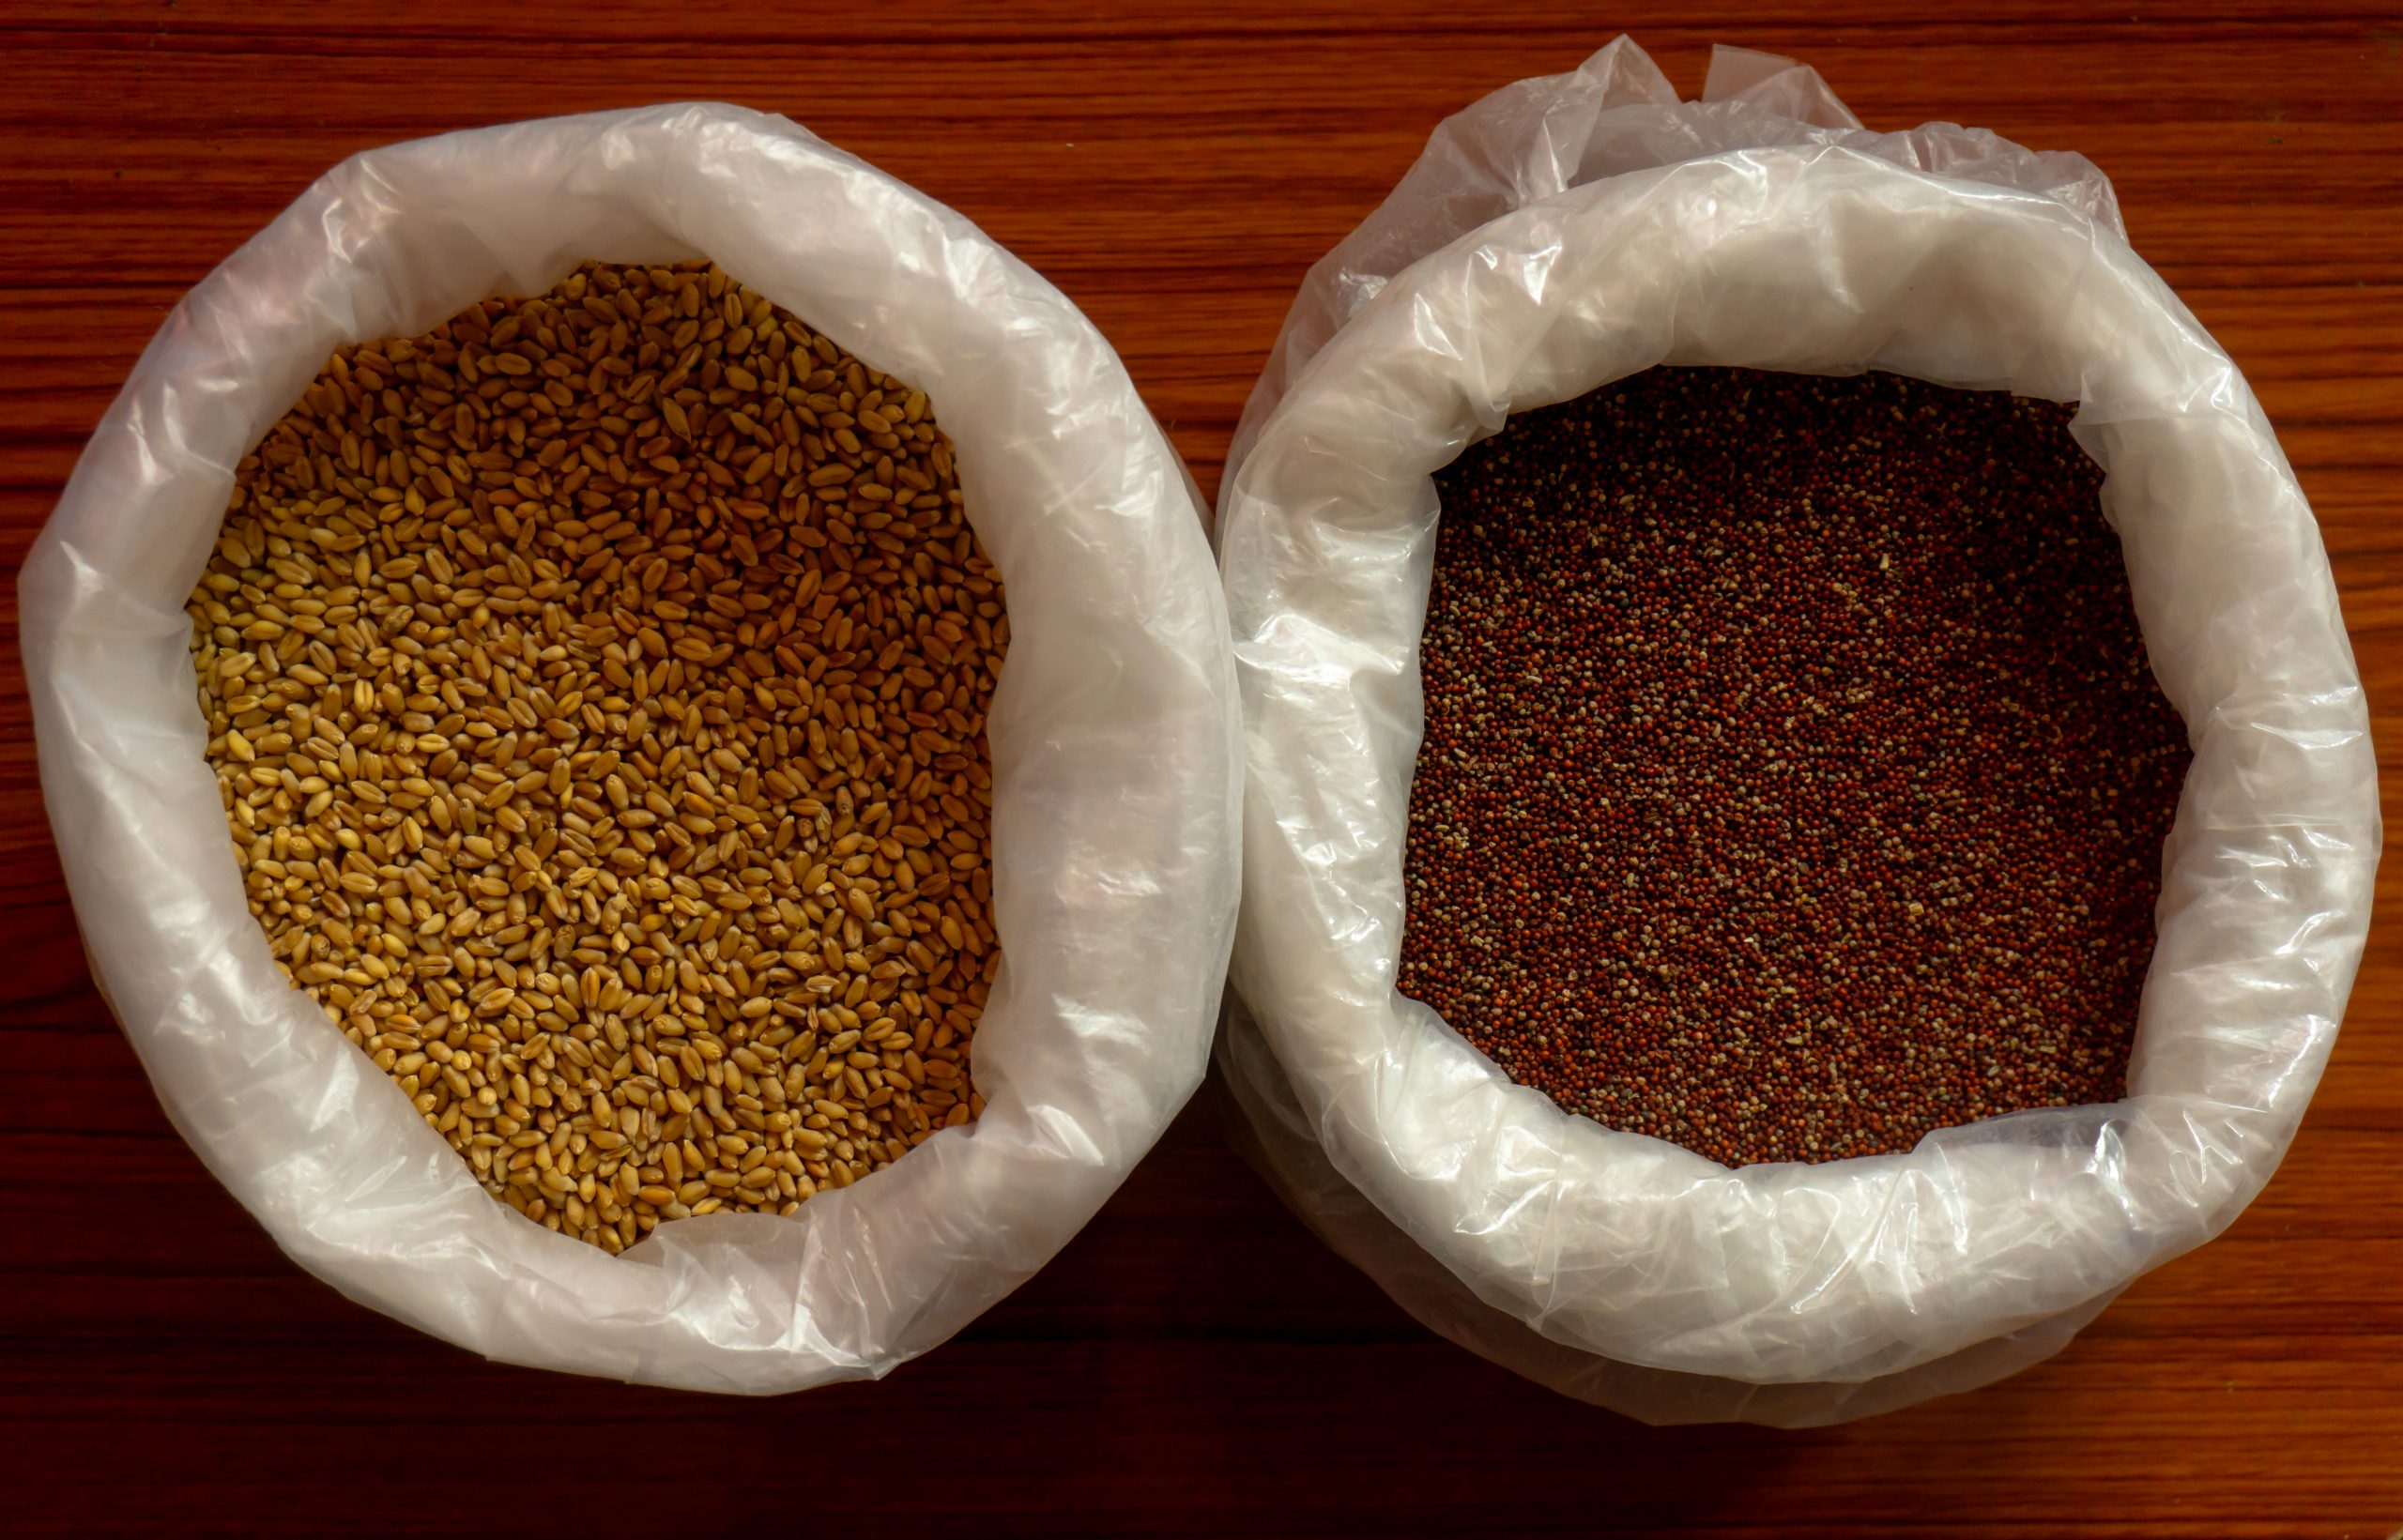 Wheat and Finger millet in two separate bags